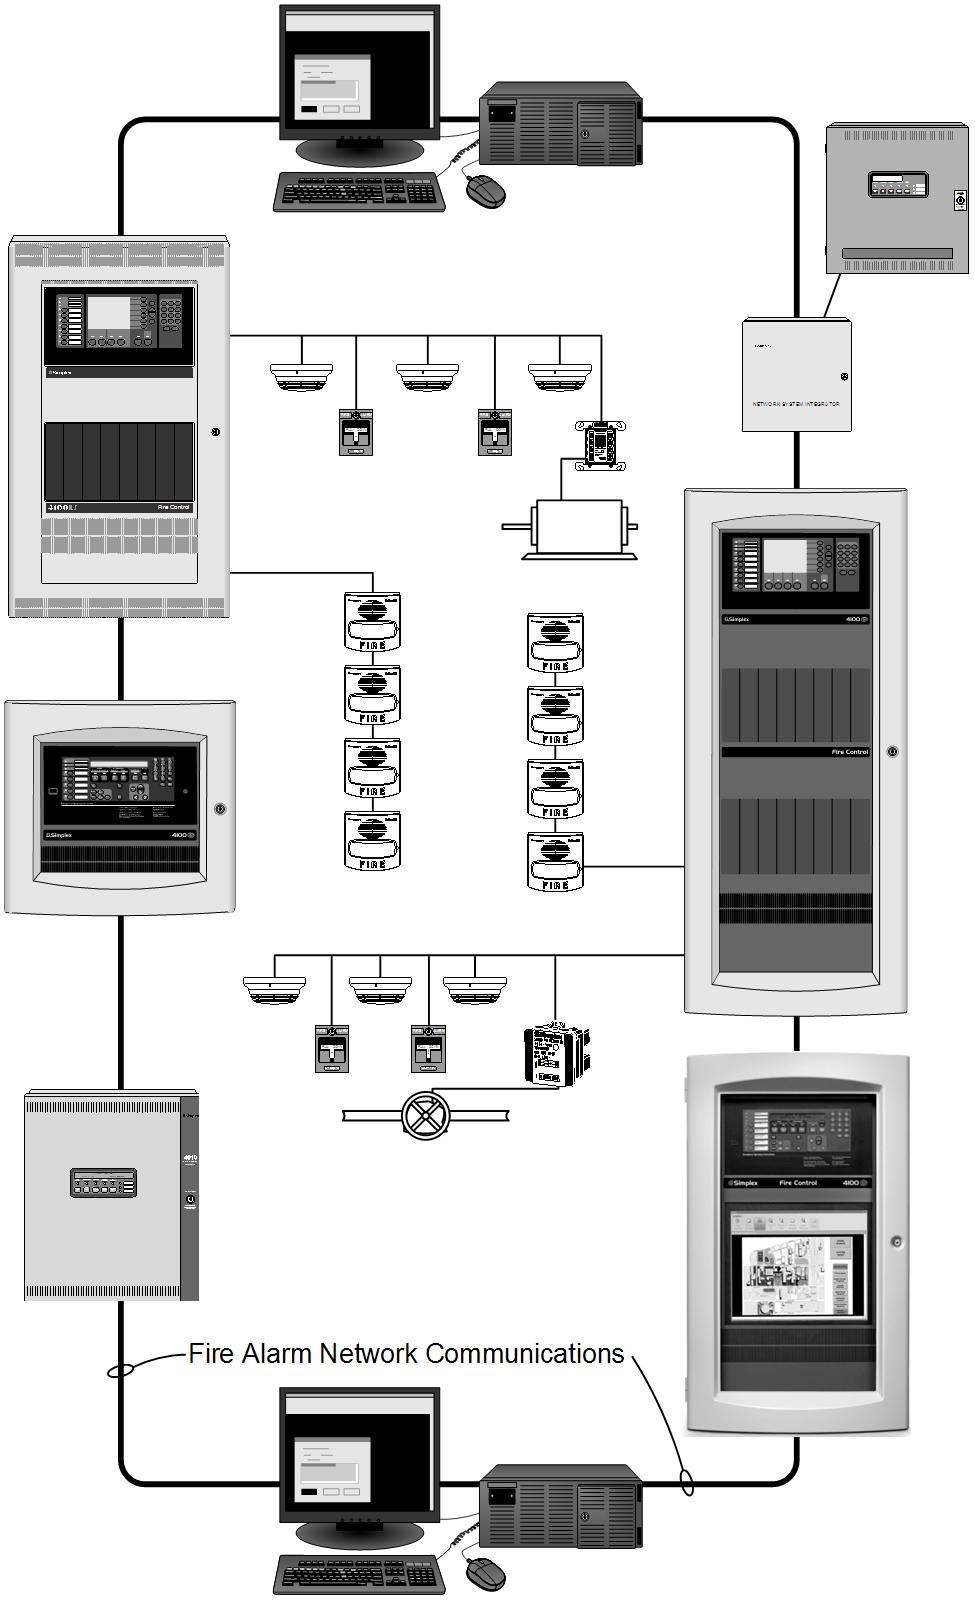 Fire Alarm Network Reference Network Overview with Applications Reference Features Network communications among system fire alarm control panels provides: Support for up to 99 nodes per Network Loop